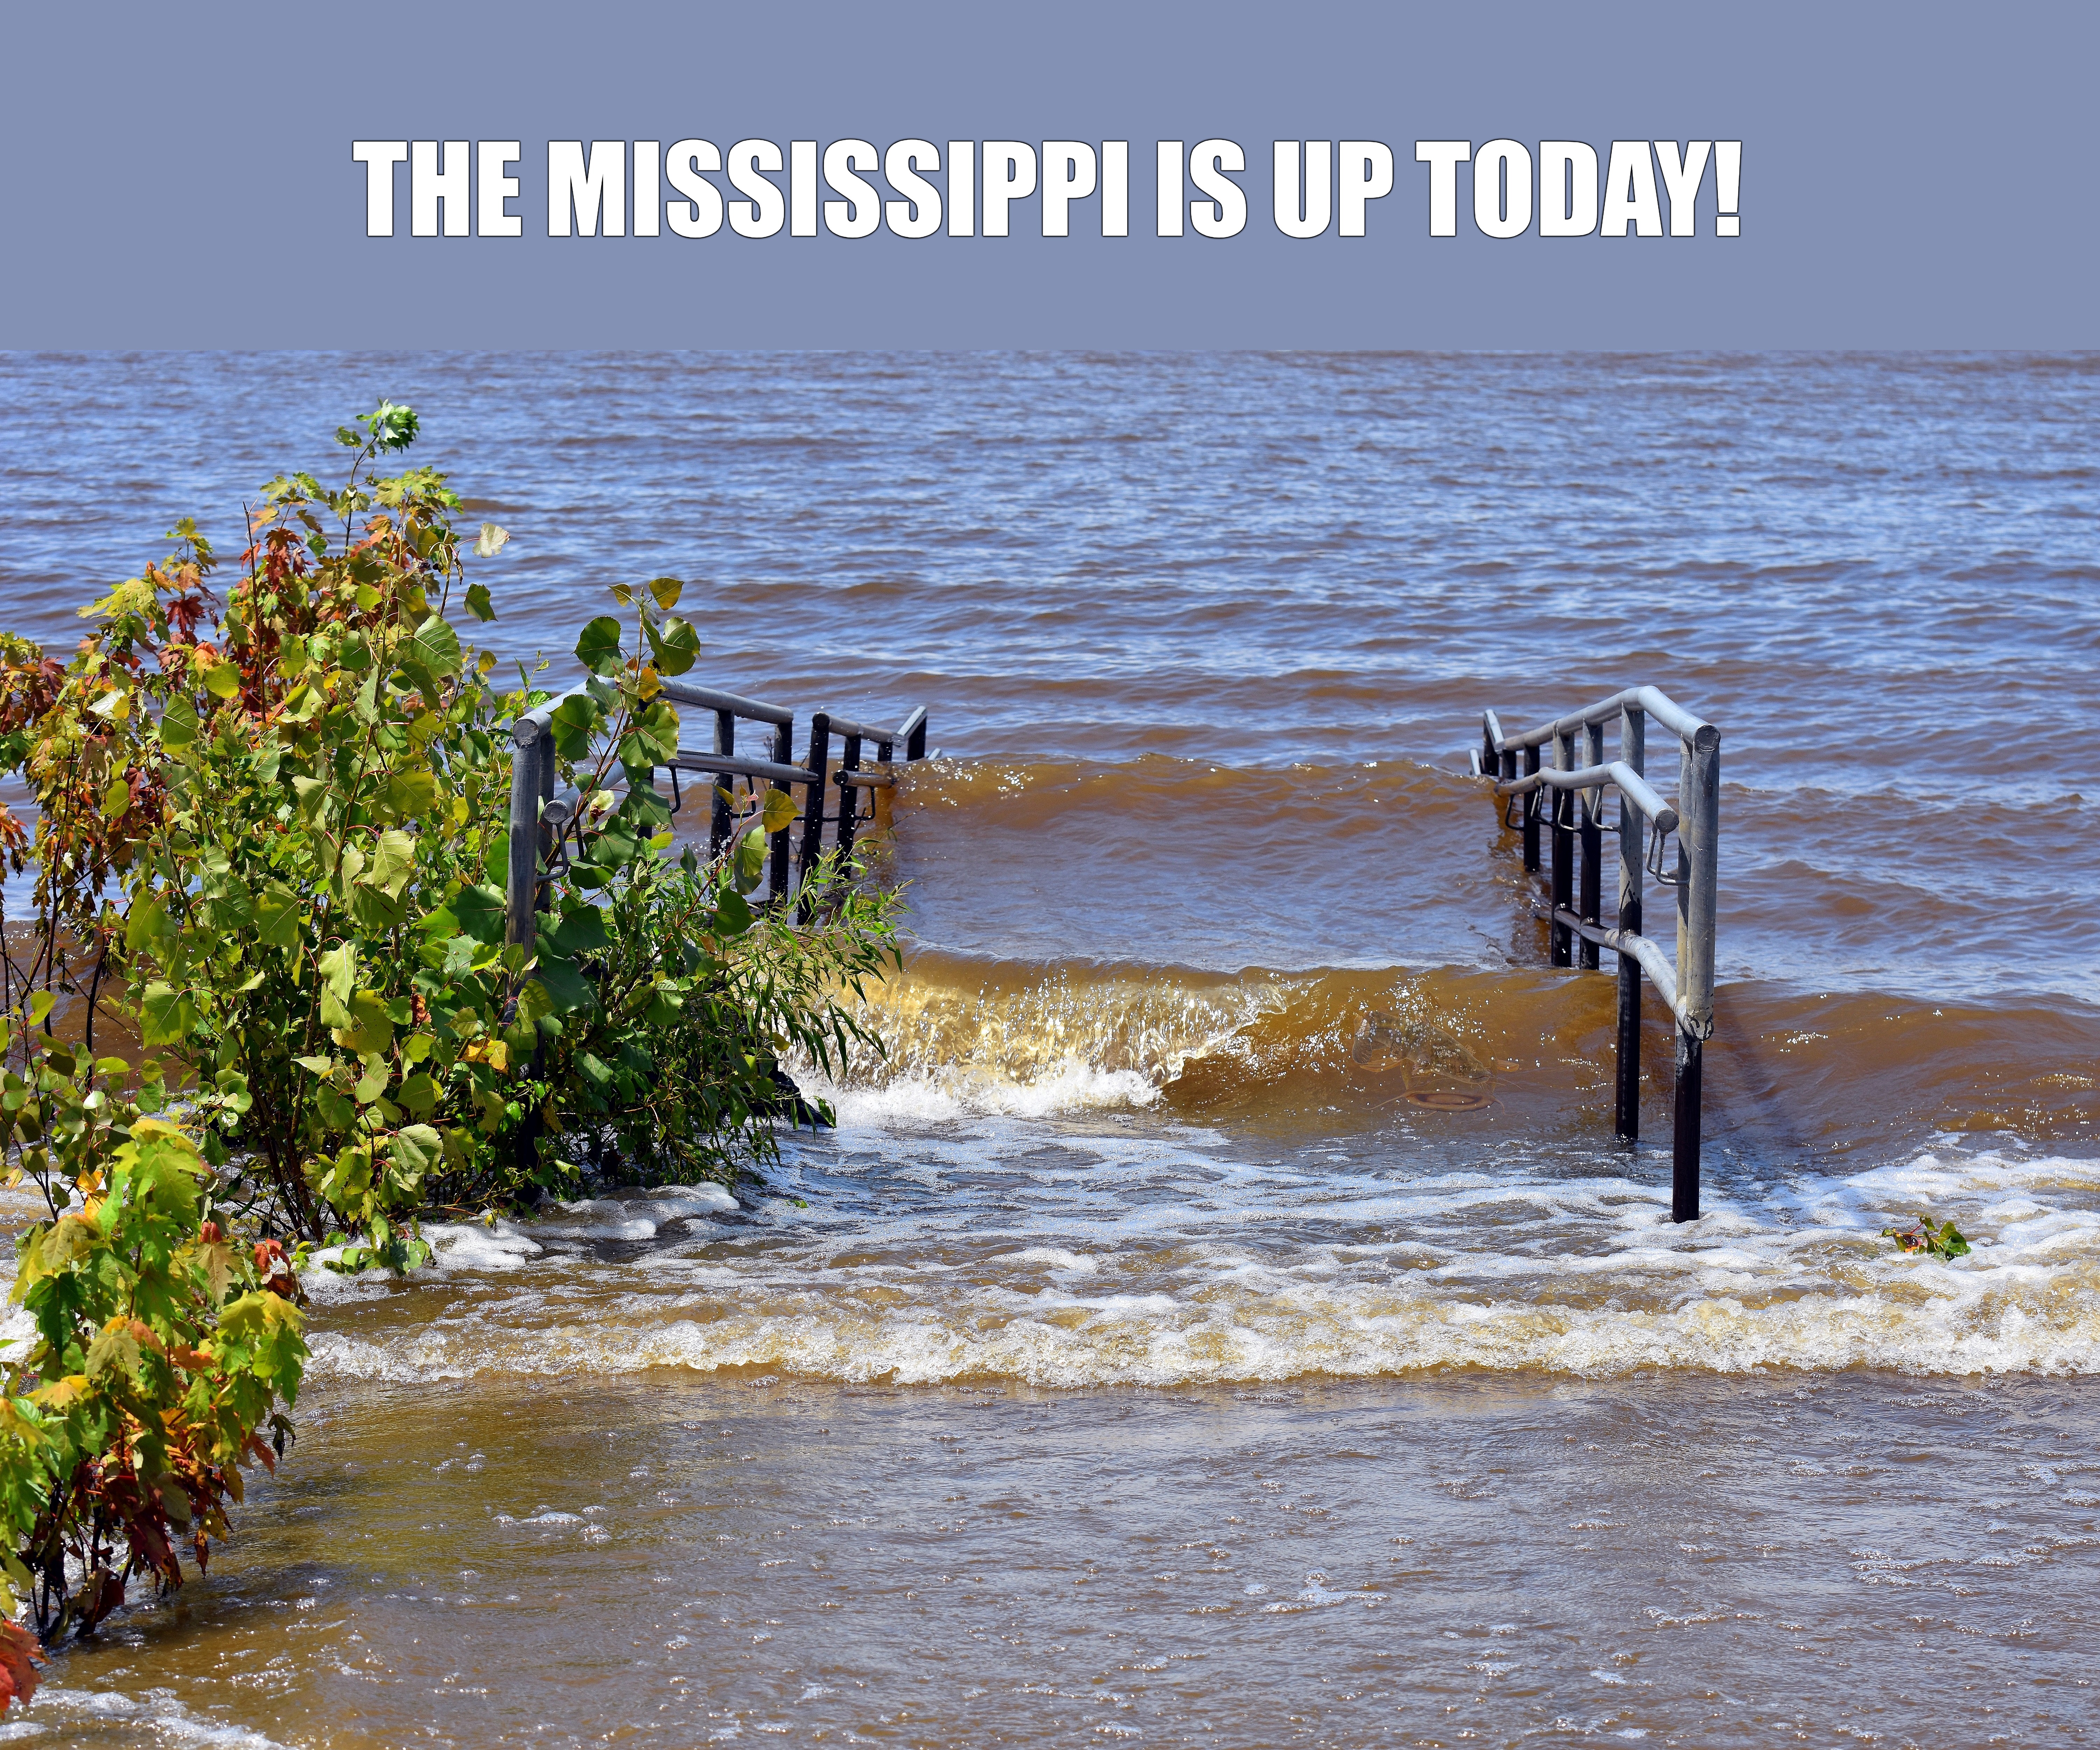 THE MISSISSIPPI IS UP TODAY! | made w/ Imgflip meme maker